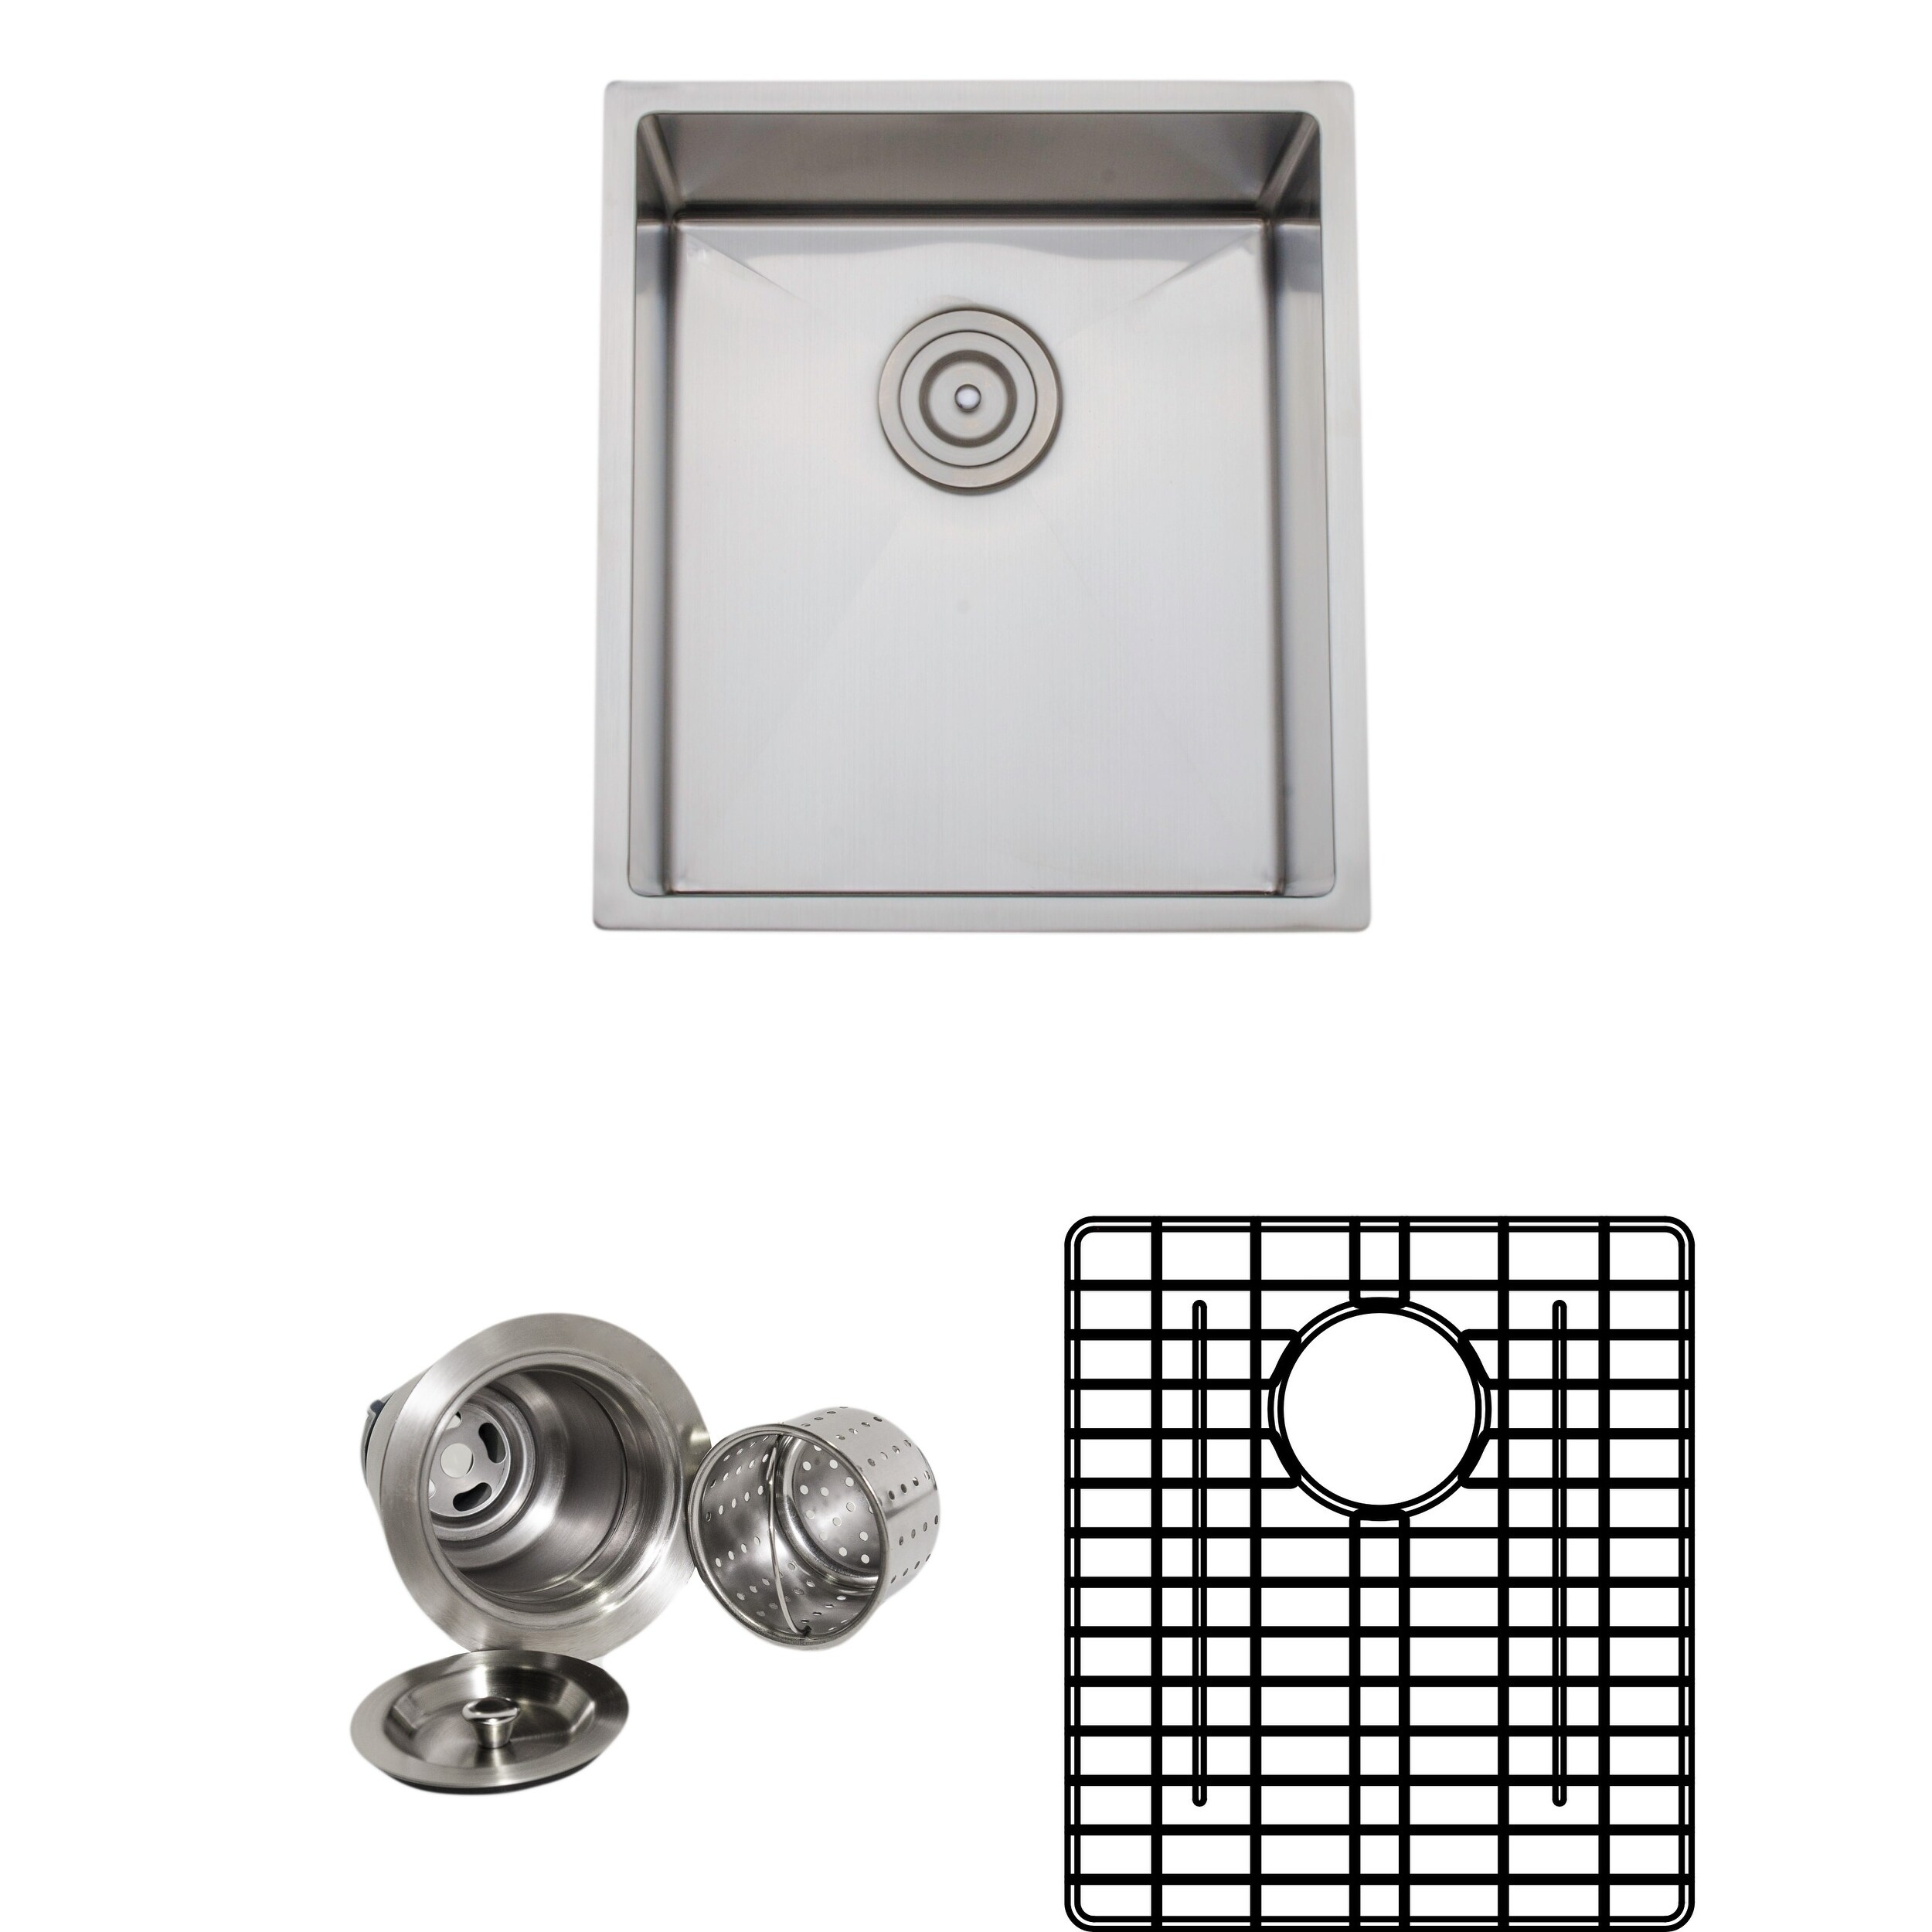 Wells Commercial Grade 16 gauge 16.75 inch Handcrafted Single Bowl Undermount Stainless Steel Kitchen Sink Pack